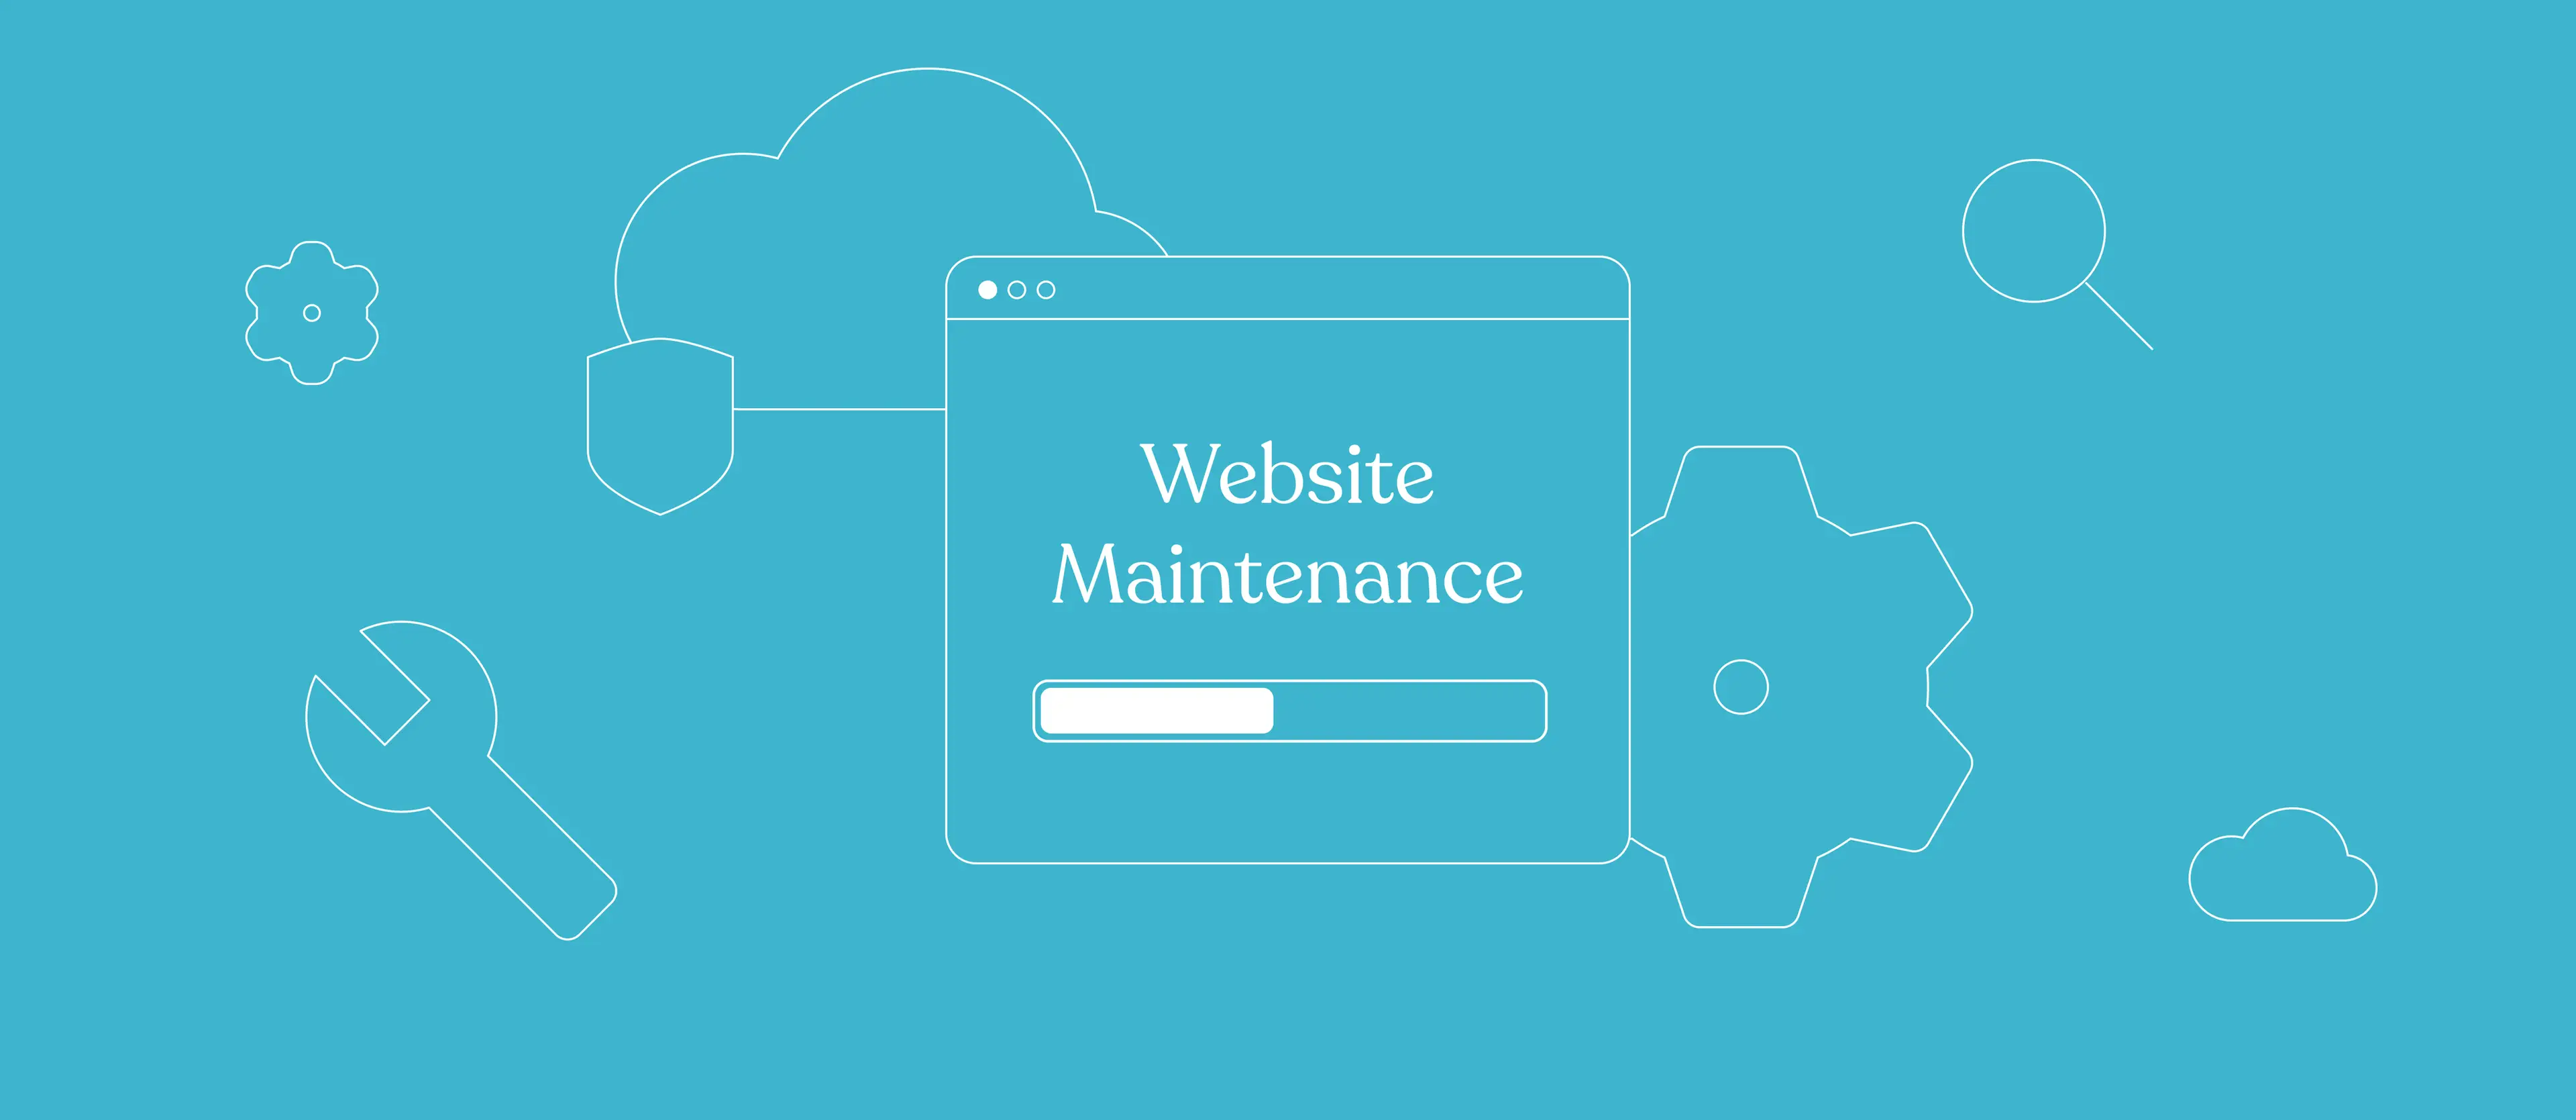 Blue graphic showing the title Website Maintenance 